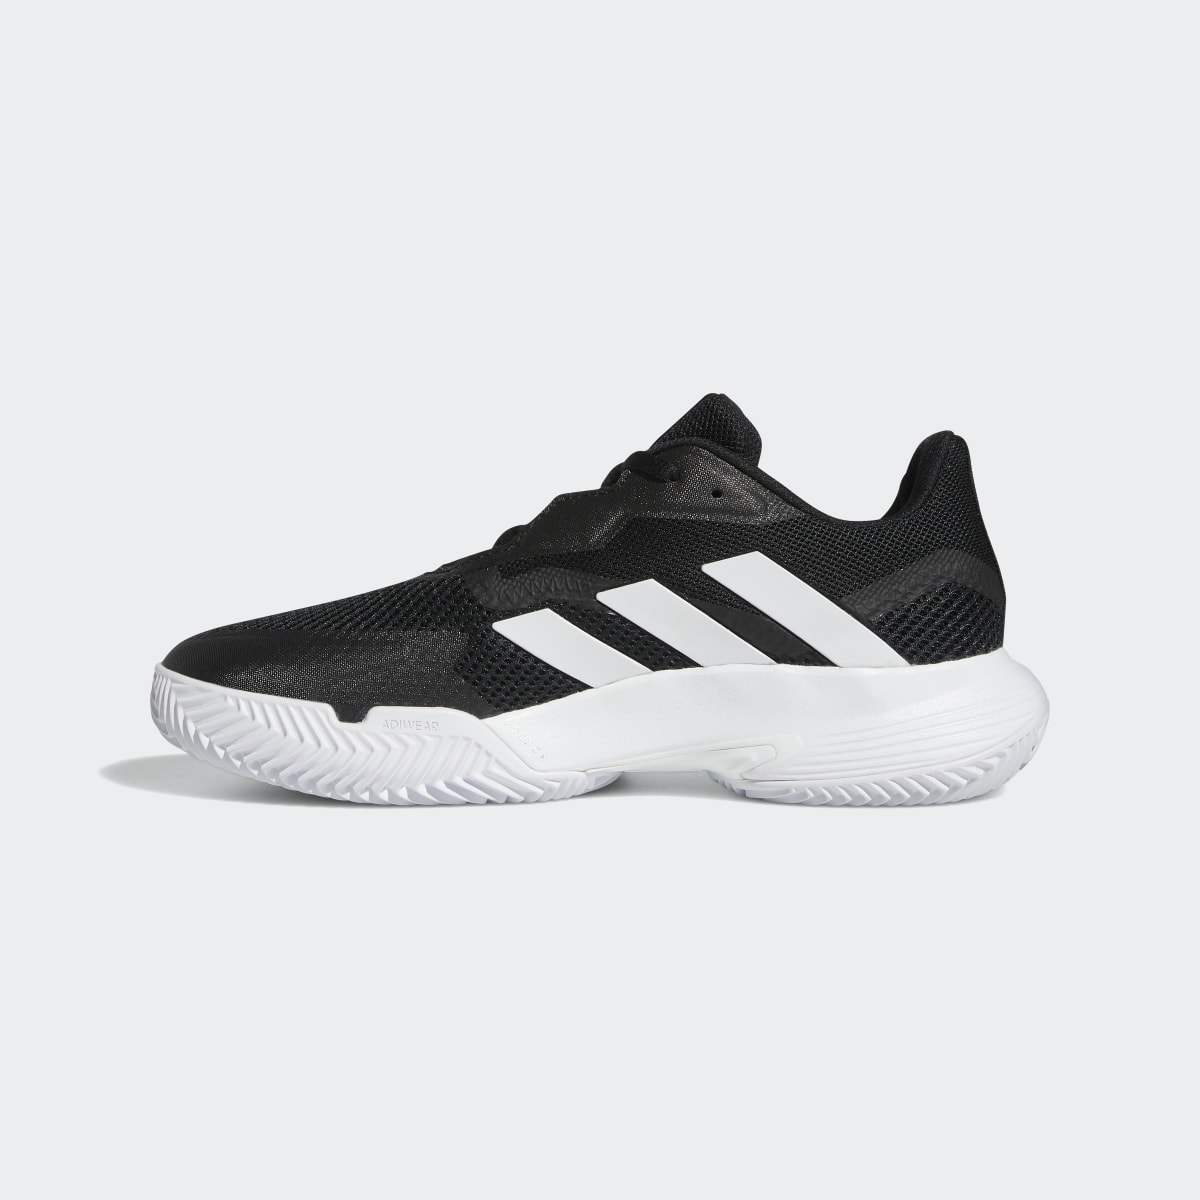 Adidas CourtJam Control Clay Tennis Shoes. 7